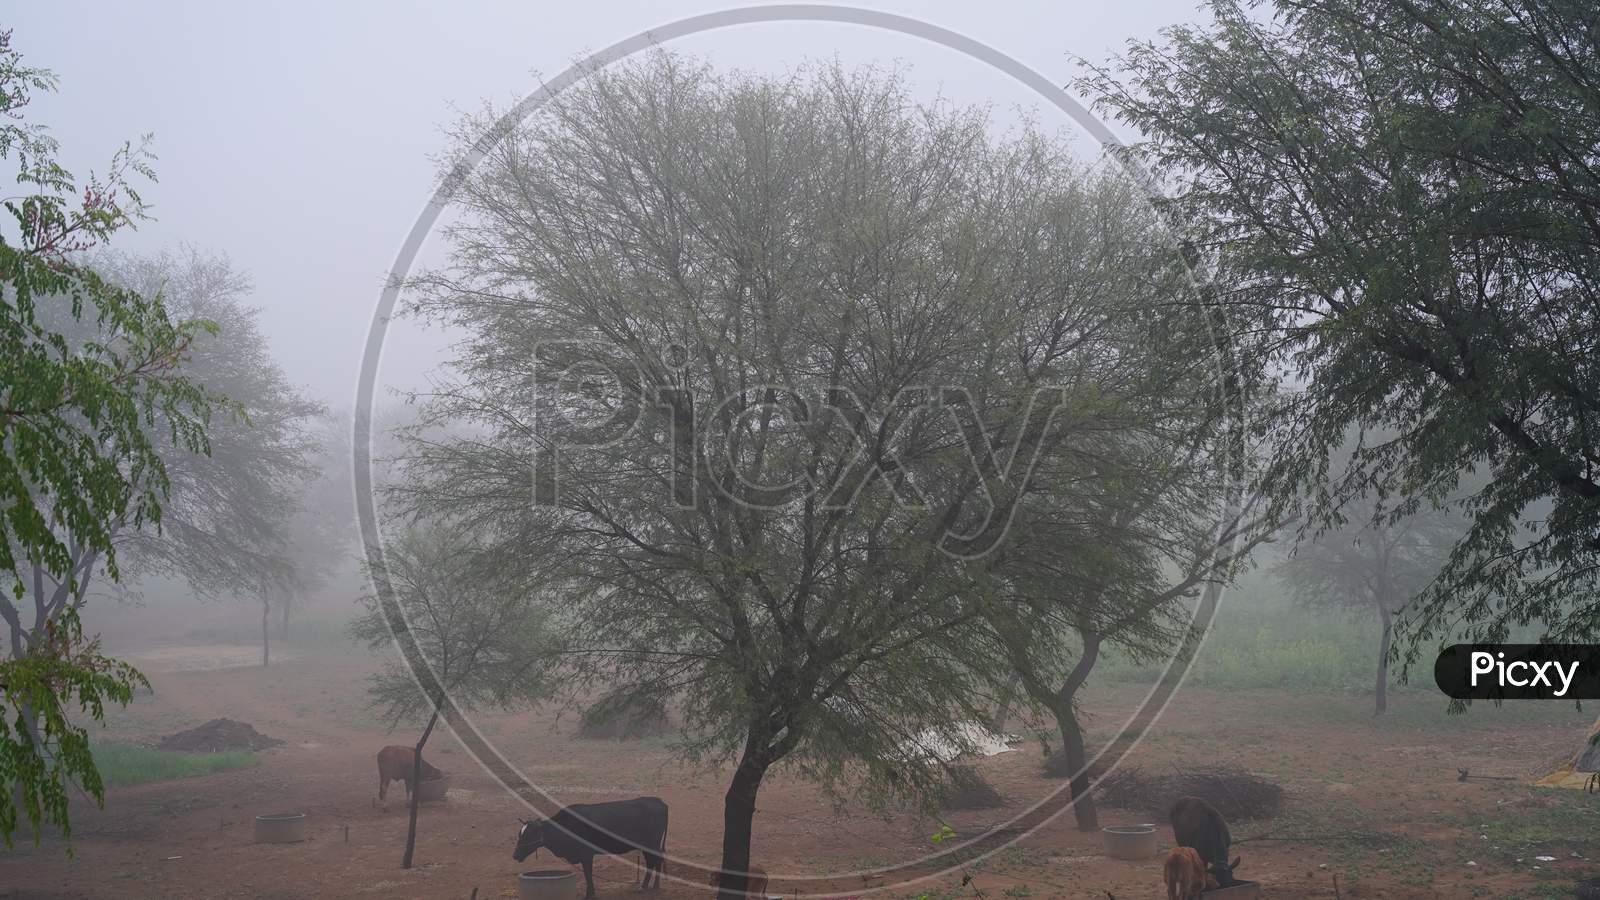 Blur Capture Shot Of Desert Acacia Or Babool Plants During Misty Cold Weather. Morning Time Beautiful Shot Of Countryside India With Acacia Tree.